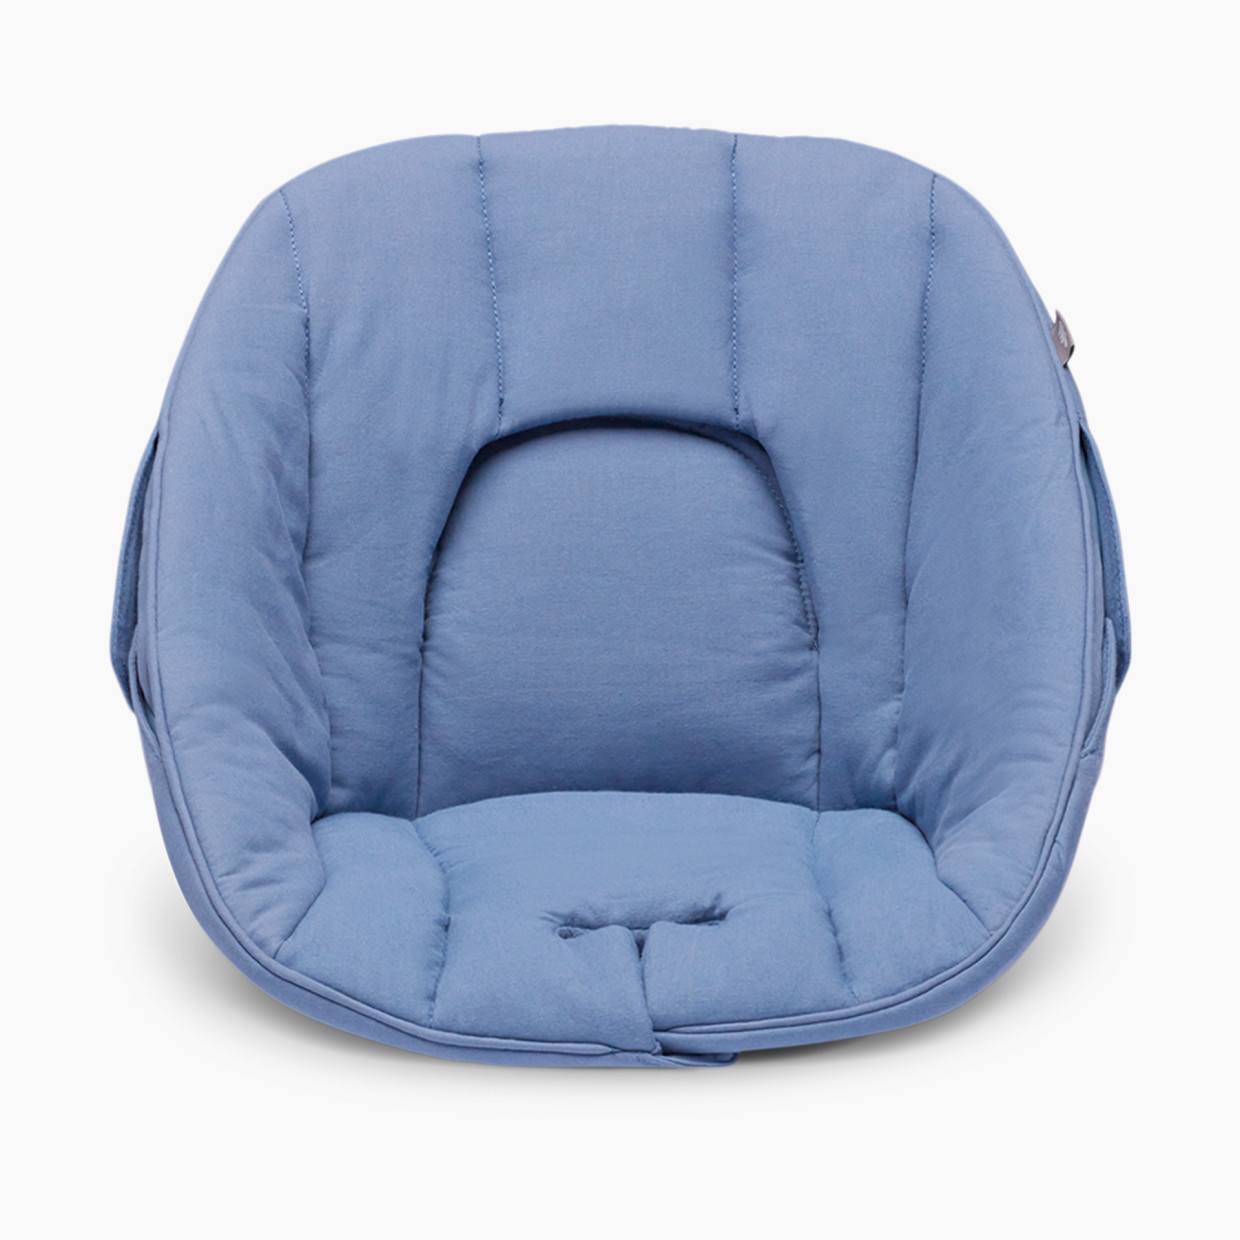 Lalo Chair Seat Cushion - Blueberry.